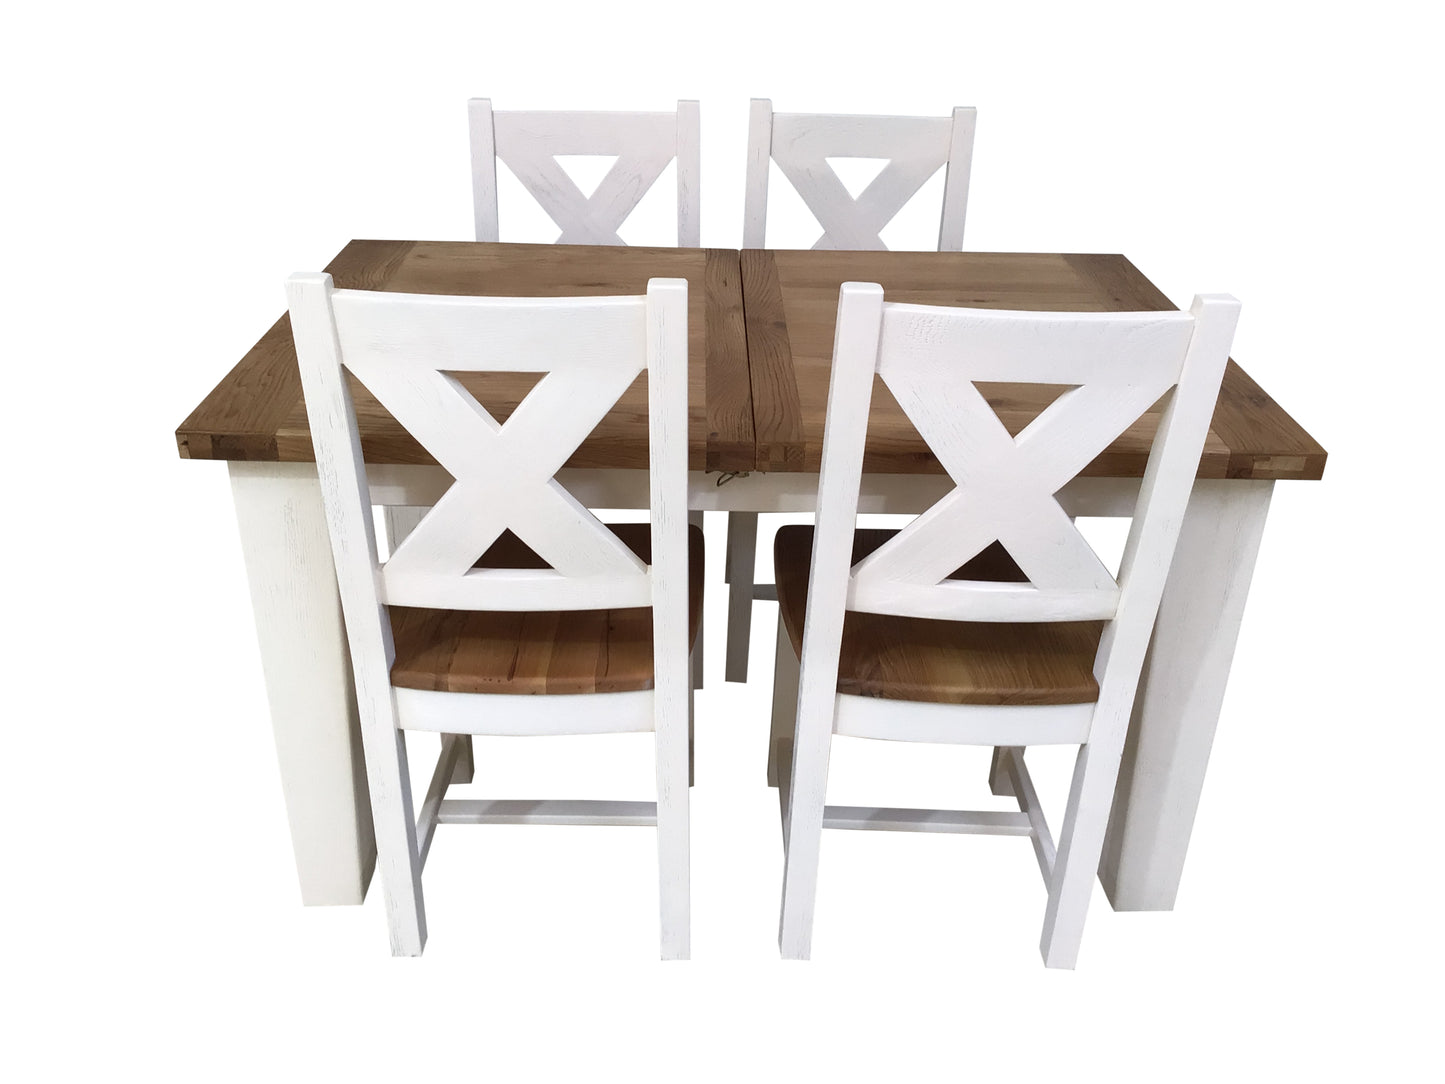 Calgary Oak 1.4m Ext Dining Set painted Off-White